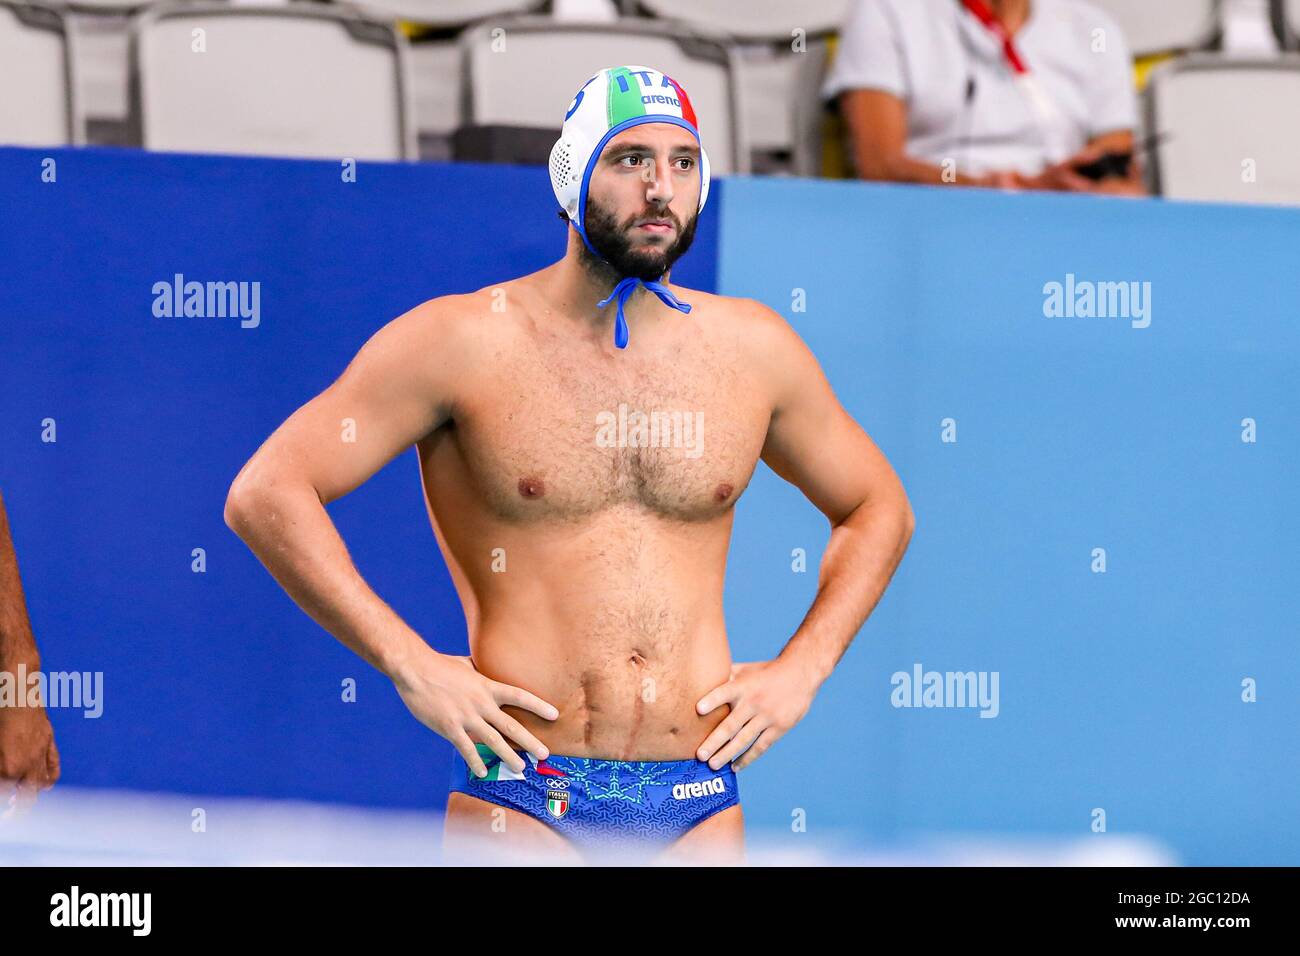 Tokyo, Japan. 06th Aug, 2021. TOKYO, JAPAN - AUGUST 6: Stefano Luongo of  Italy during the Tokyo 2020 Olympic Waterpolo Tournament men's  classification 5th-8th match between Italy and United States at Tatsumi